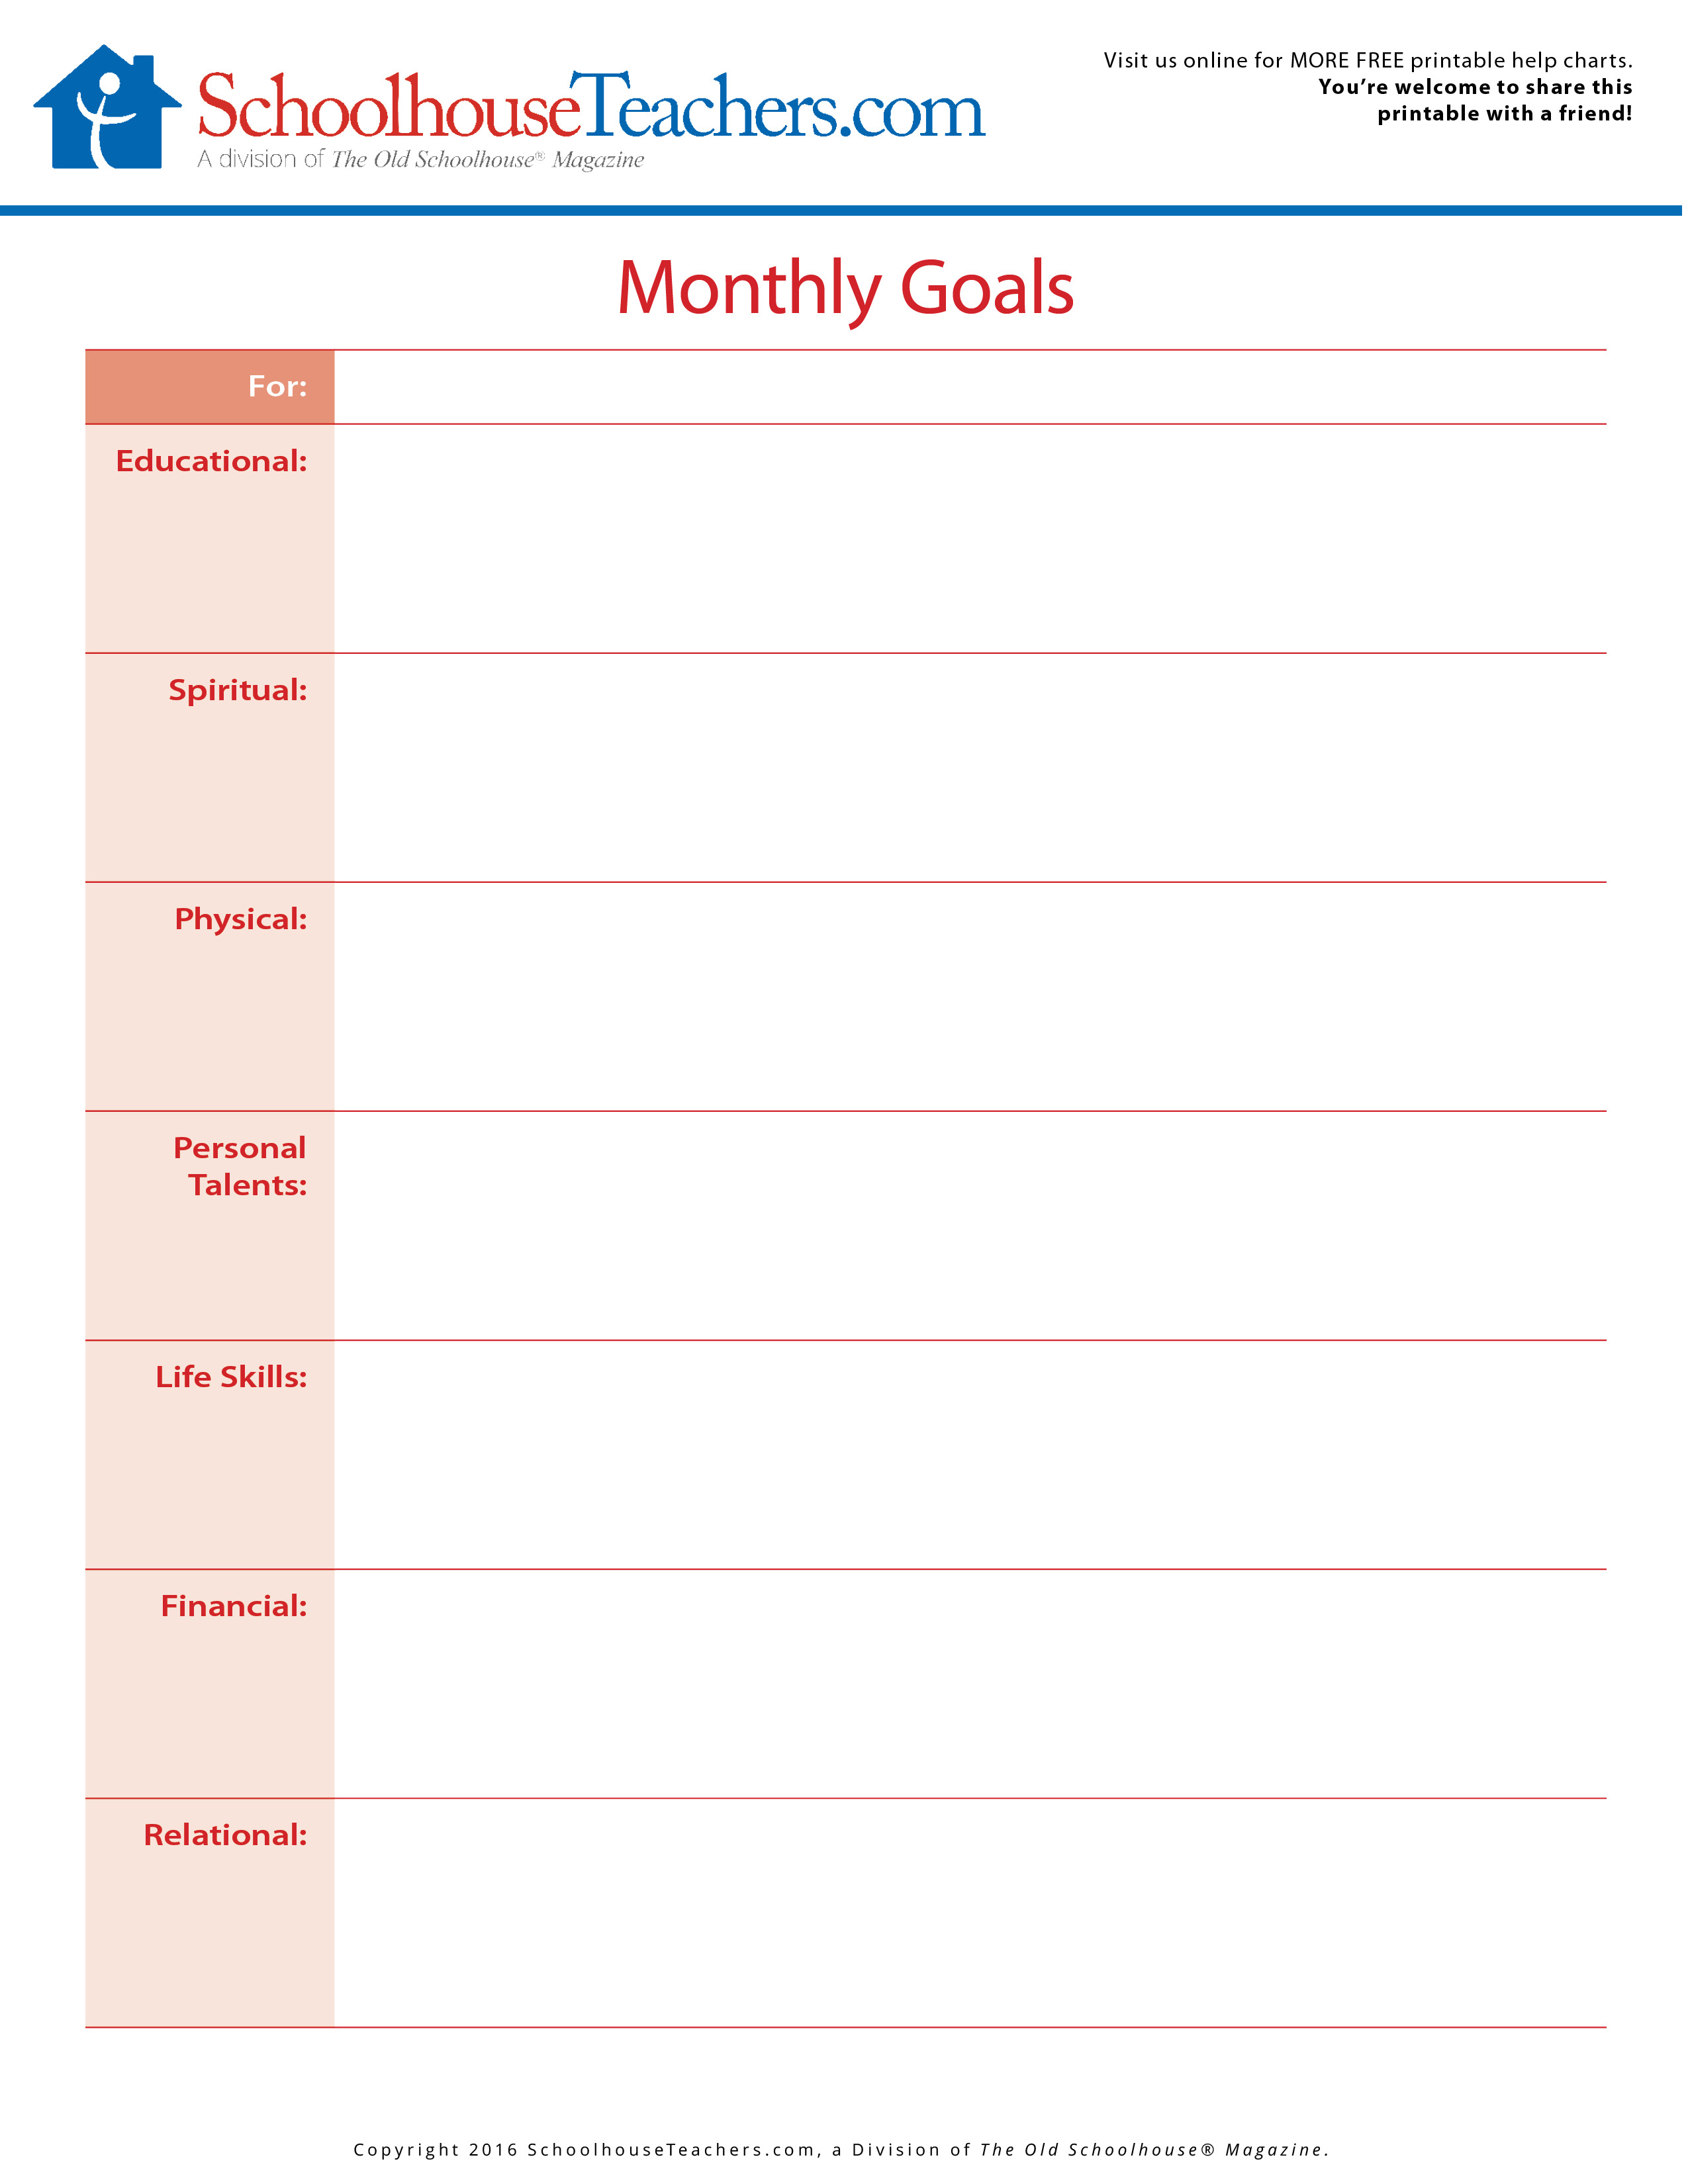 Free Printable Monthly Goals and Month at a Glance Planner